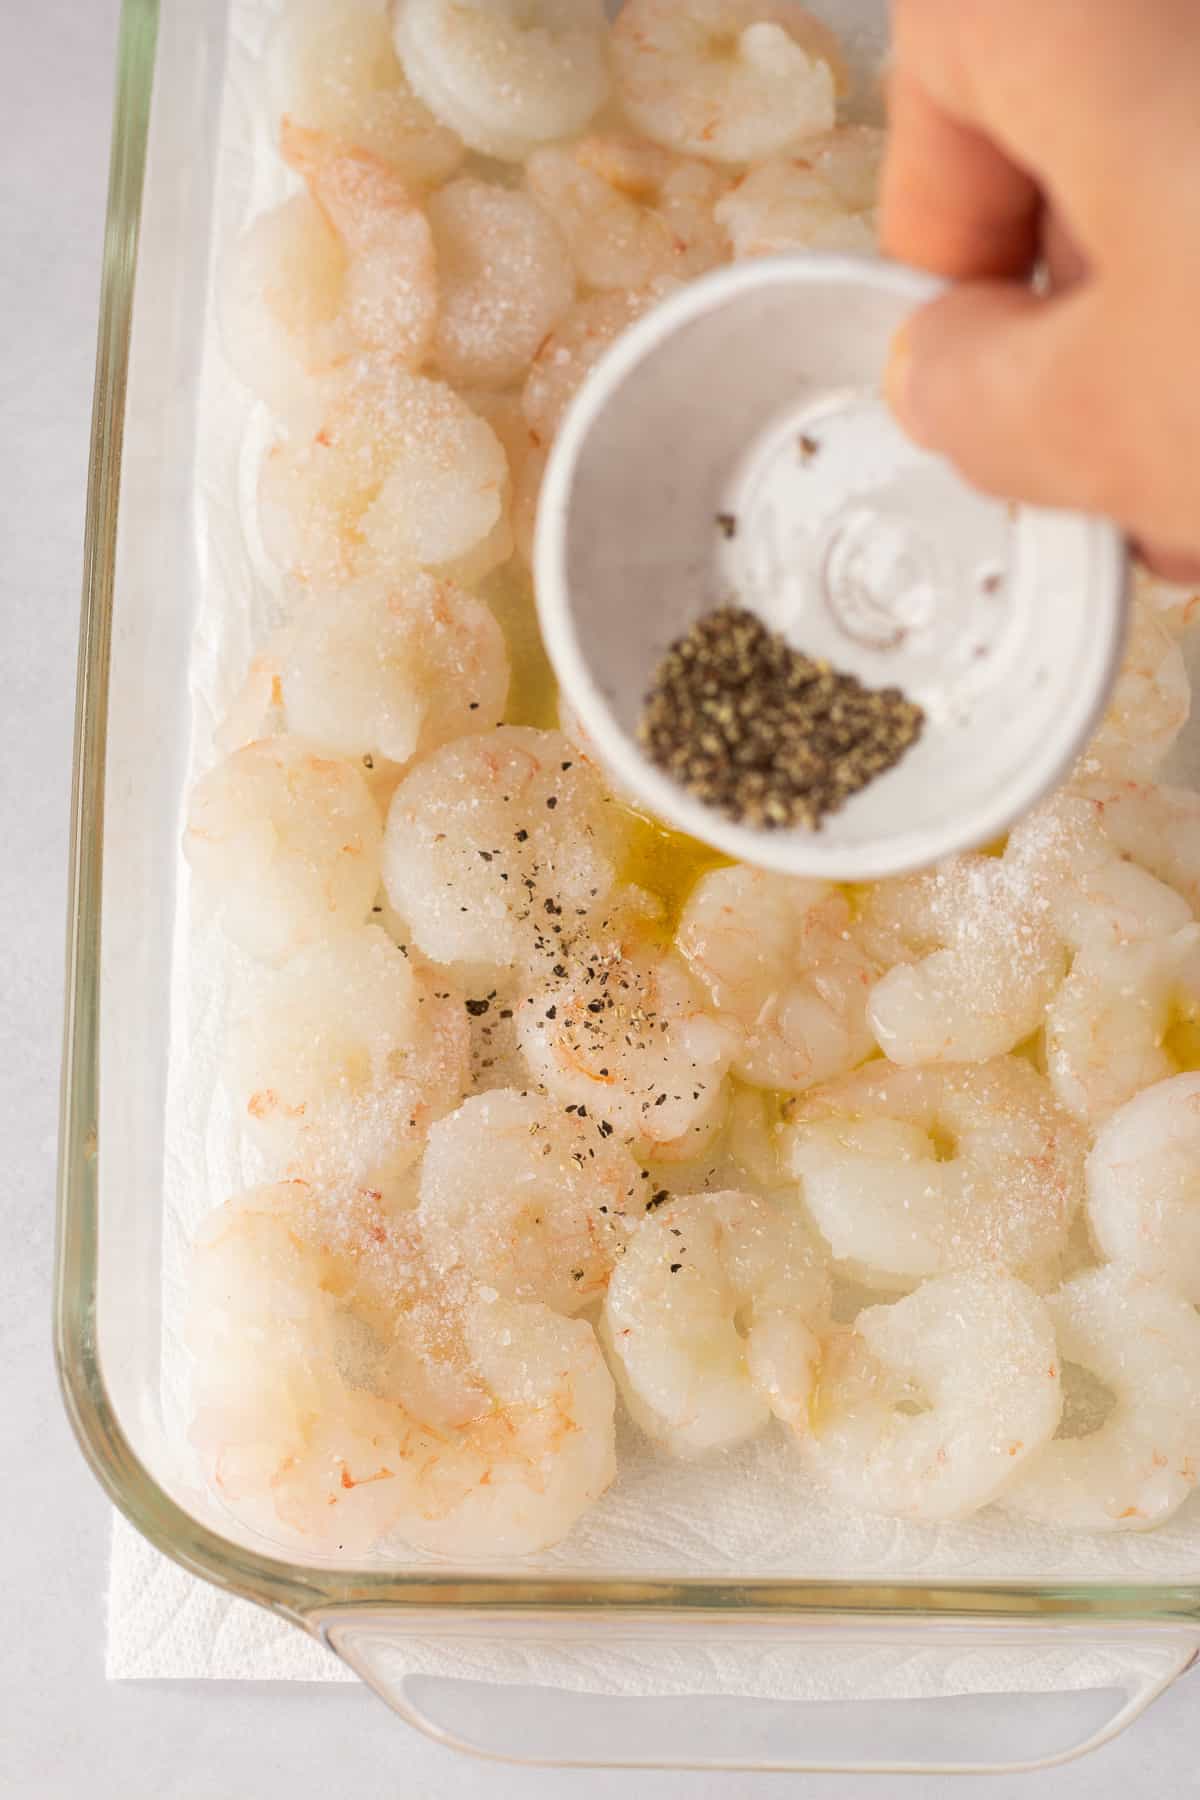 Pouring ground black pepper from a small white bowl into a clear dish with raw shrimp.